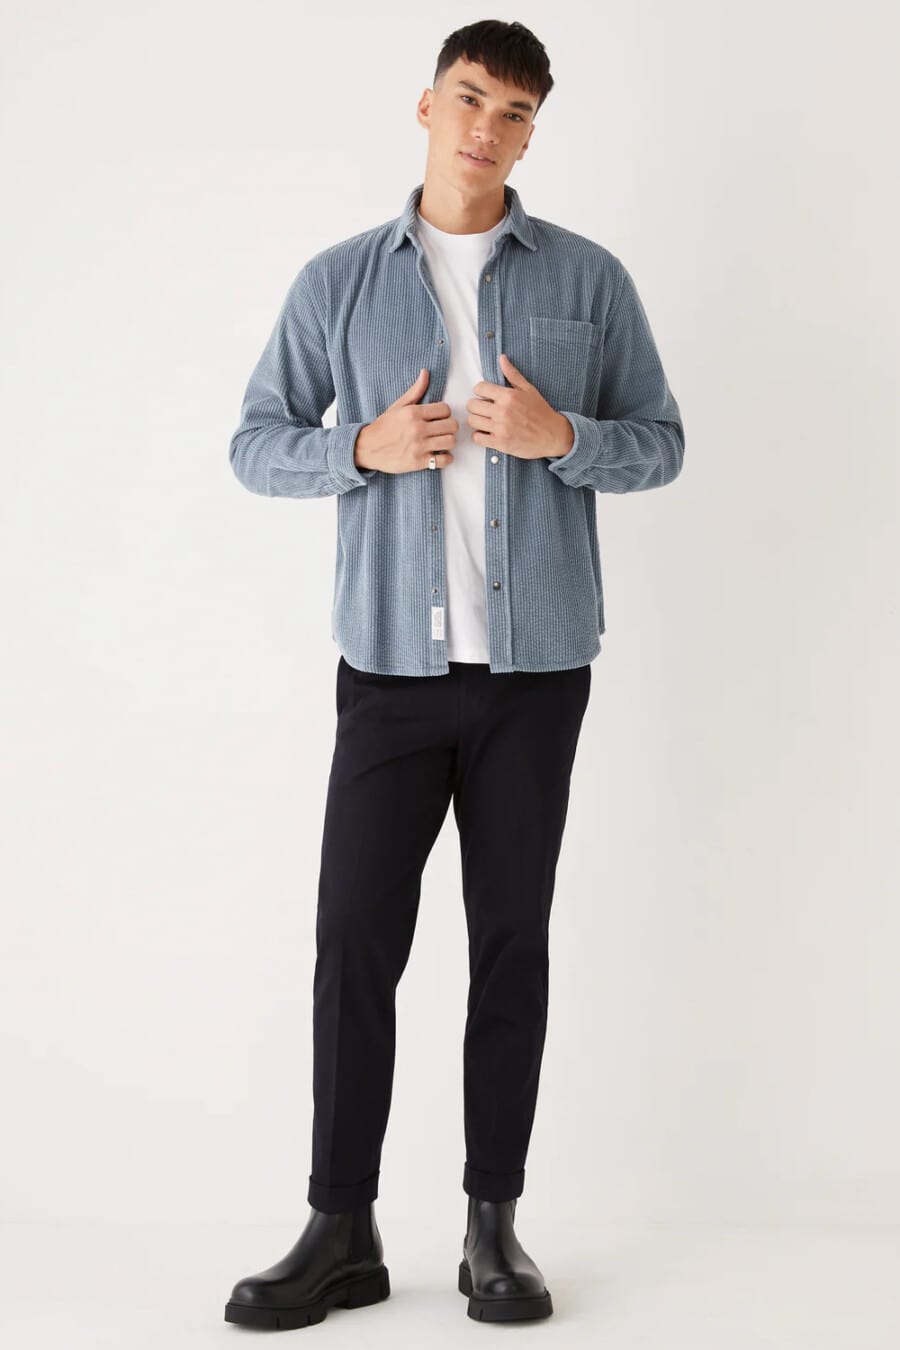 Men's black pants, white T-shirt, light blue corduroy shacket and black chunky Chelsea boots outfit